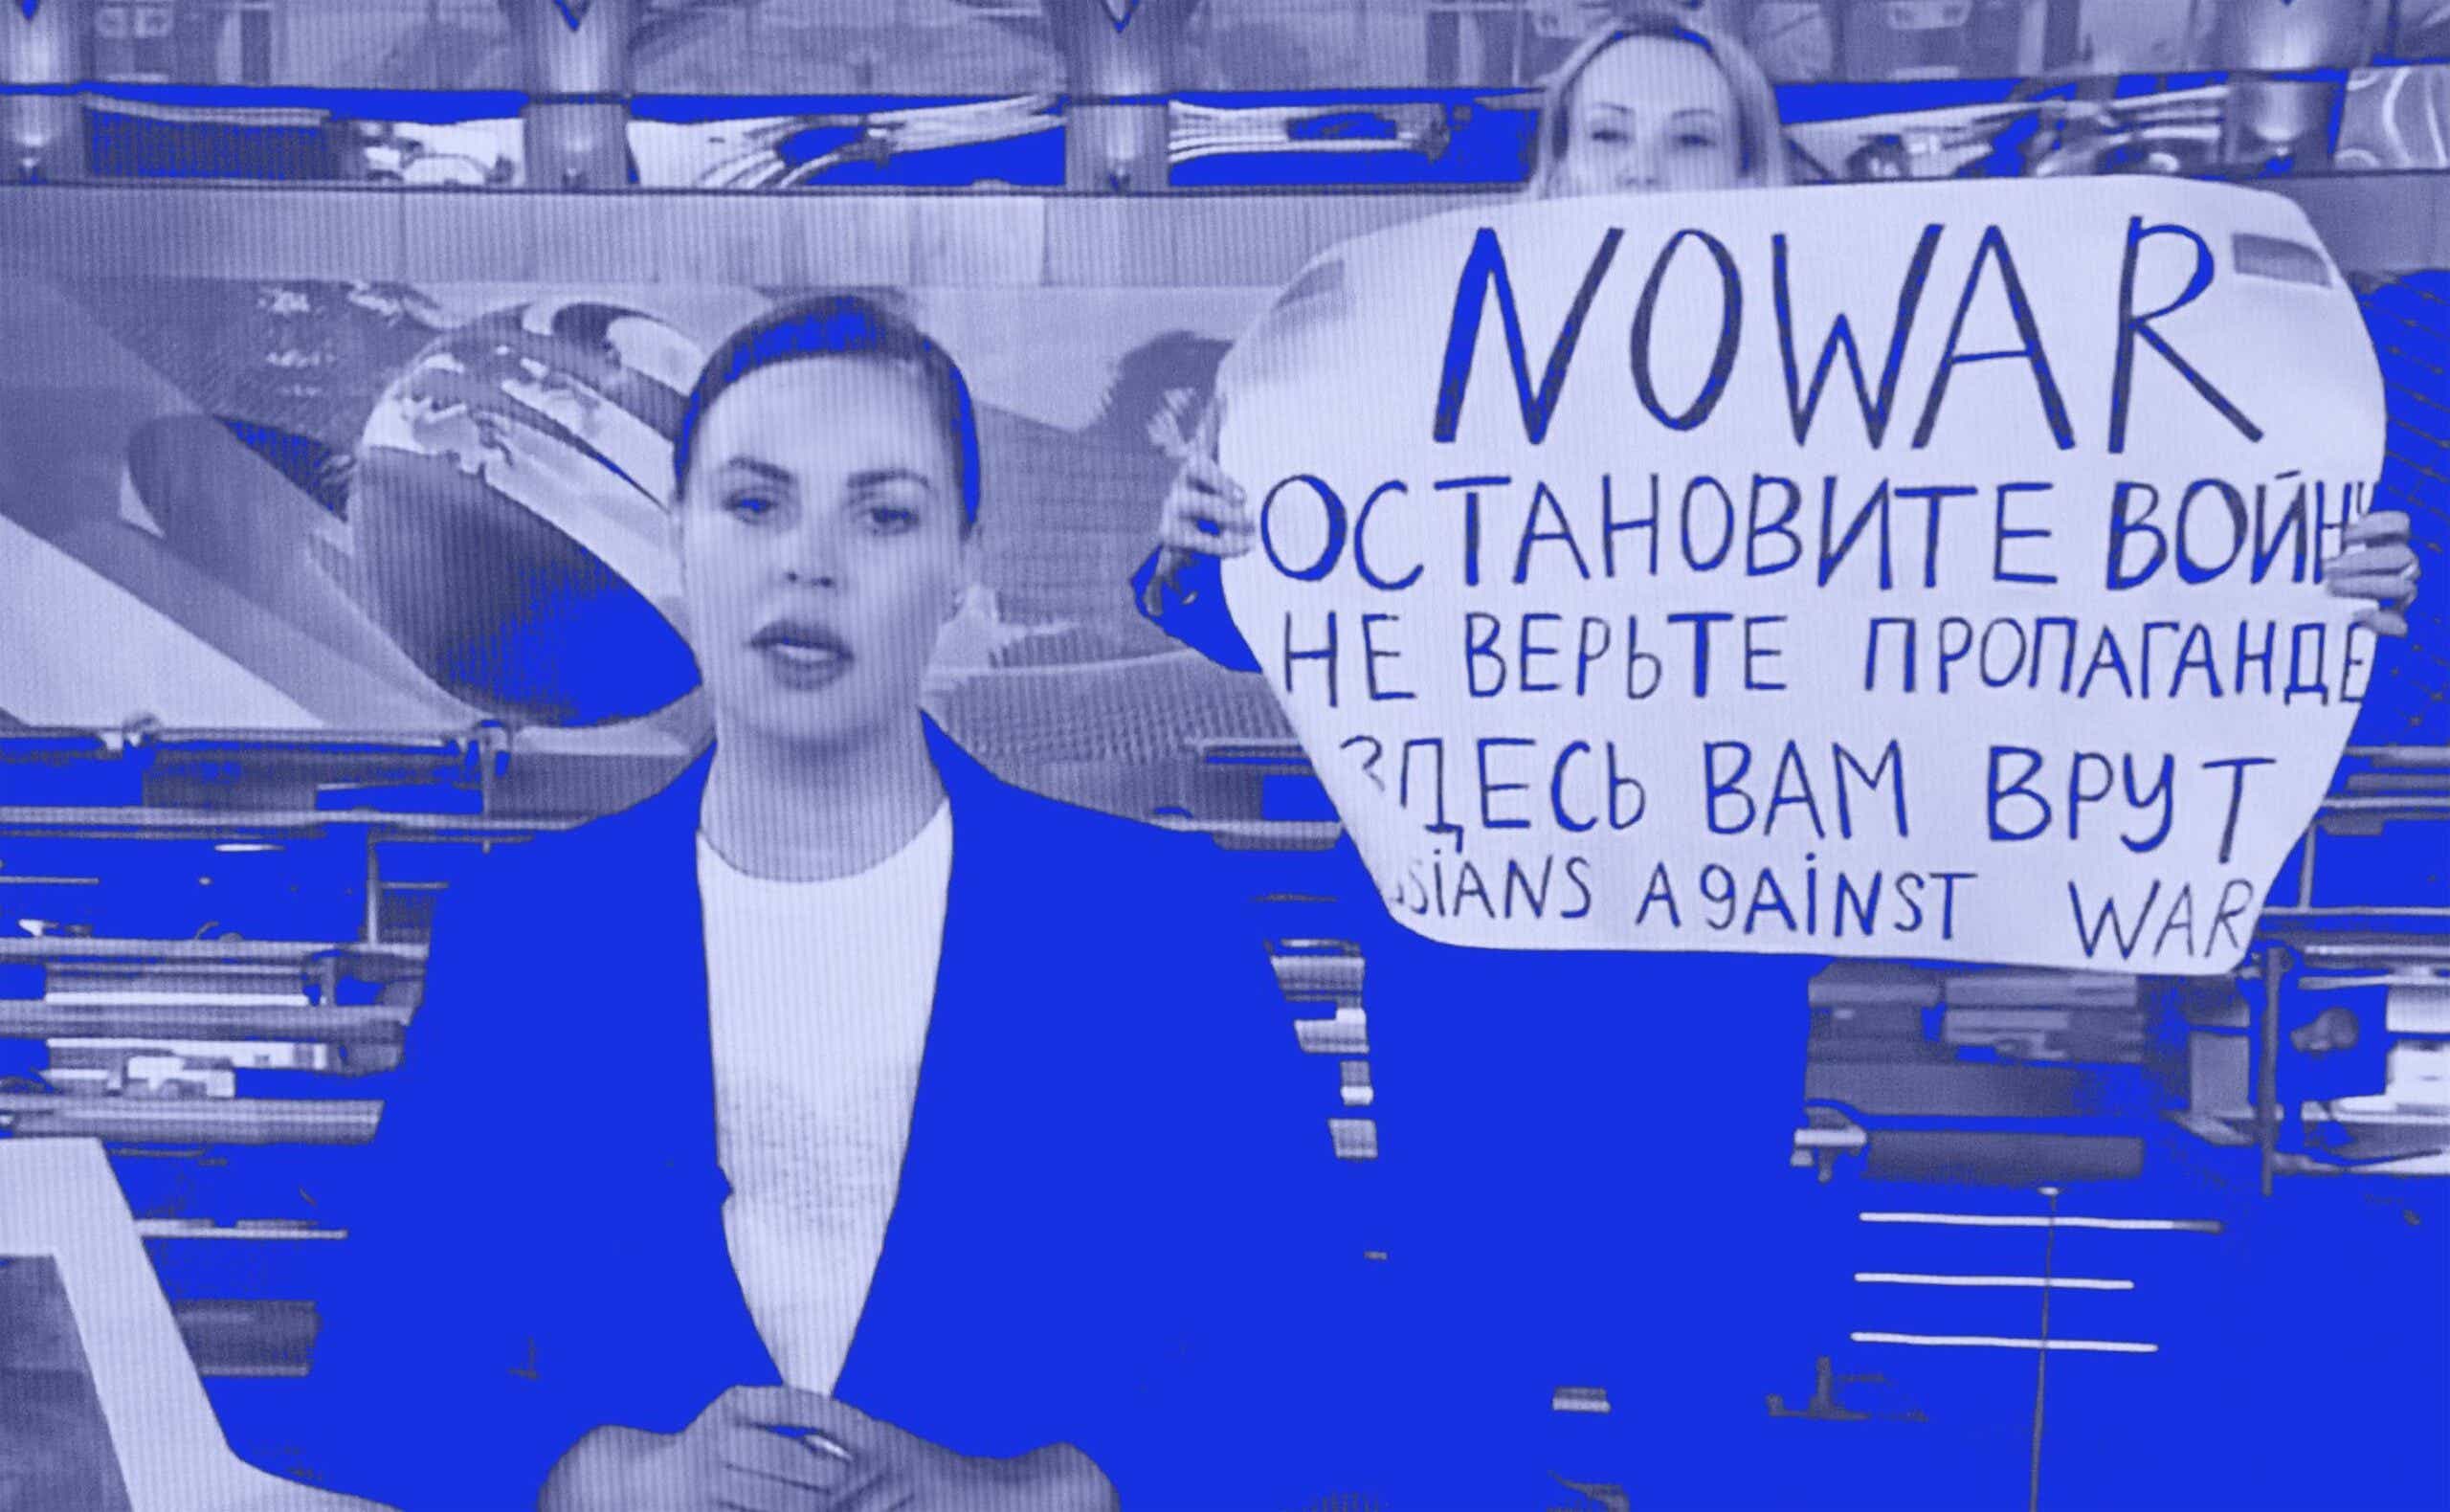 Marina Ovsyannikova, an employee of the Russian TV network Channel One, holds an anti-war sign on air